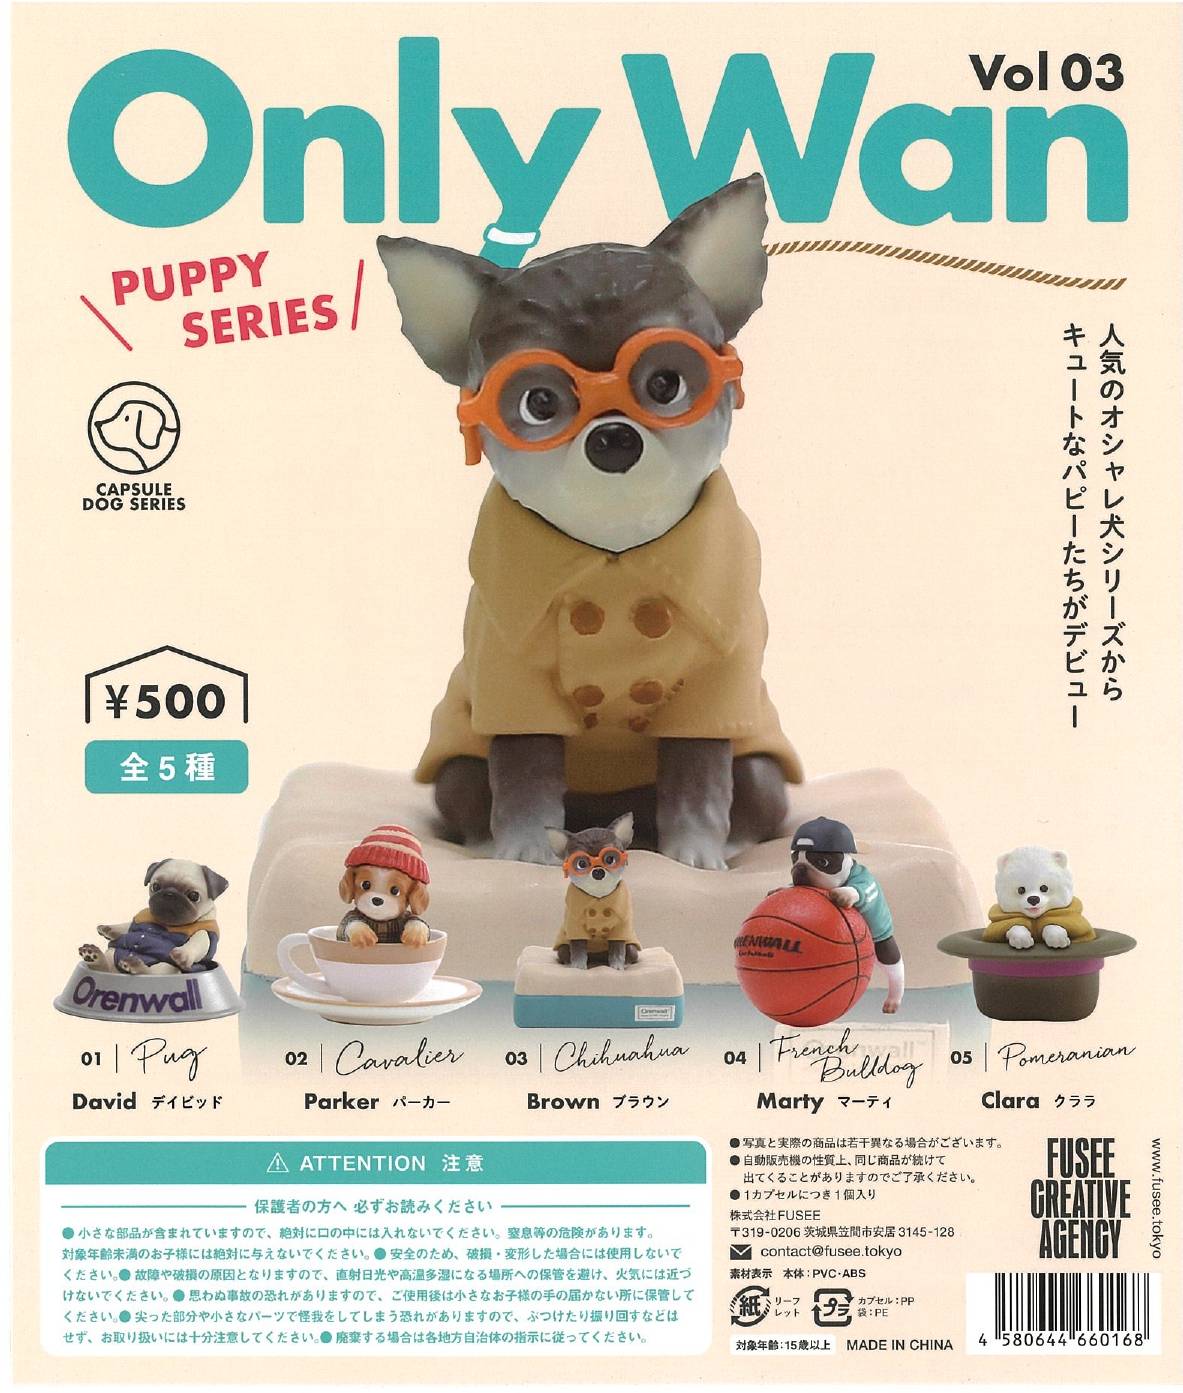 CP2606 Only Wan Vol 03 PUPPY SERIES